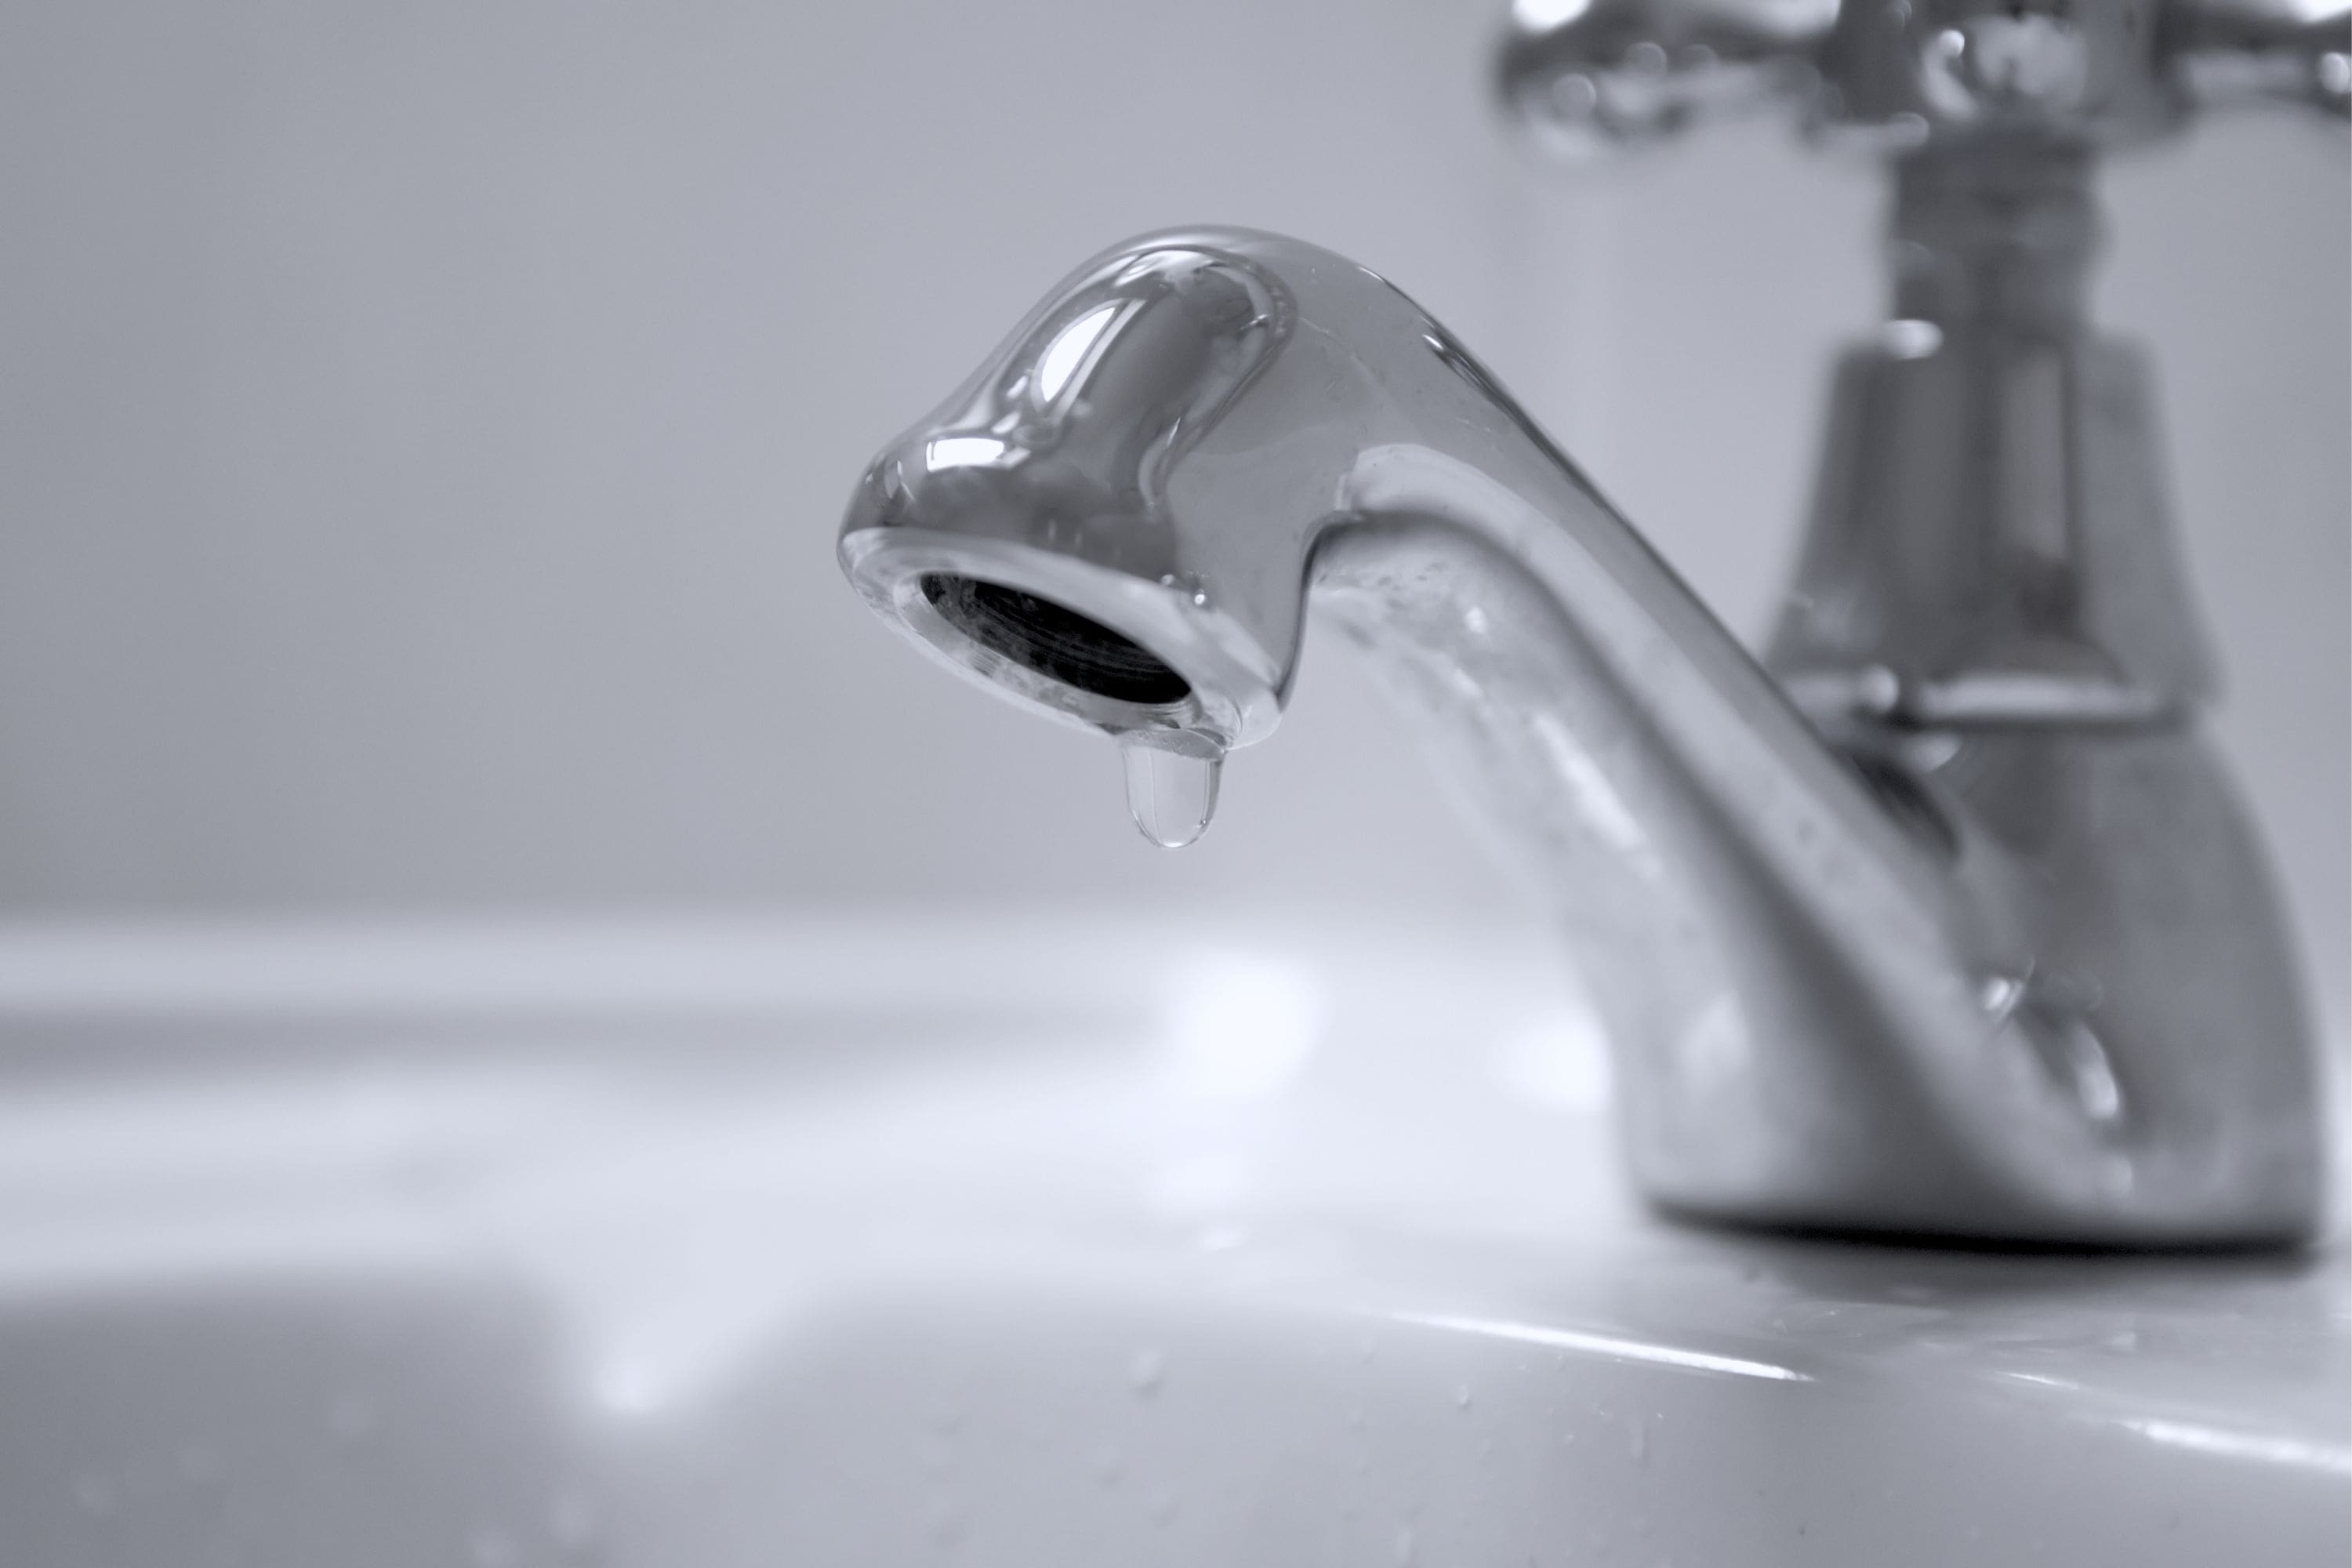 How to Fix a Leaking Tap | Step-By-Step | Swan's Plumbing